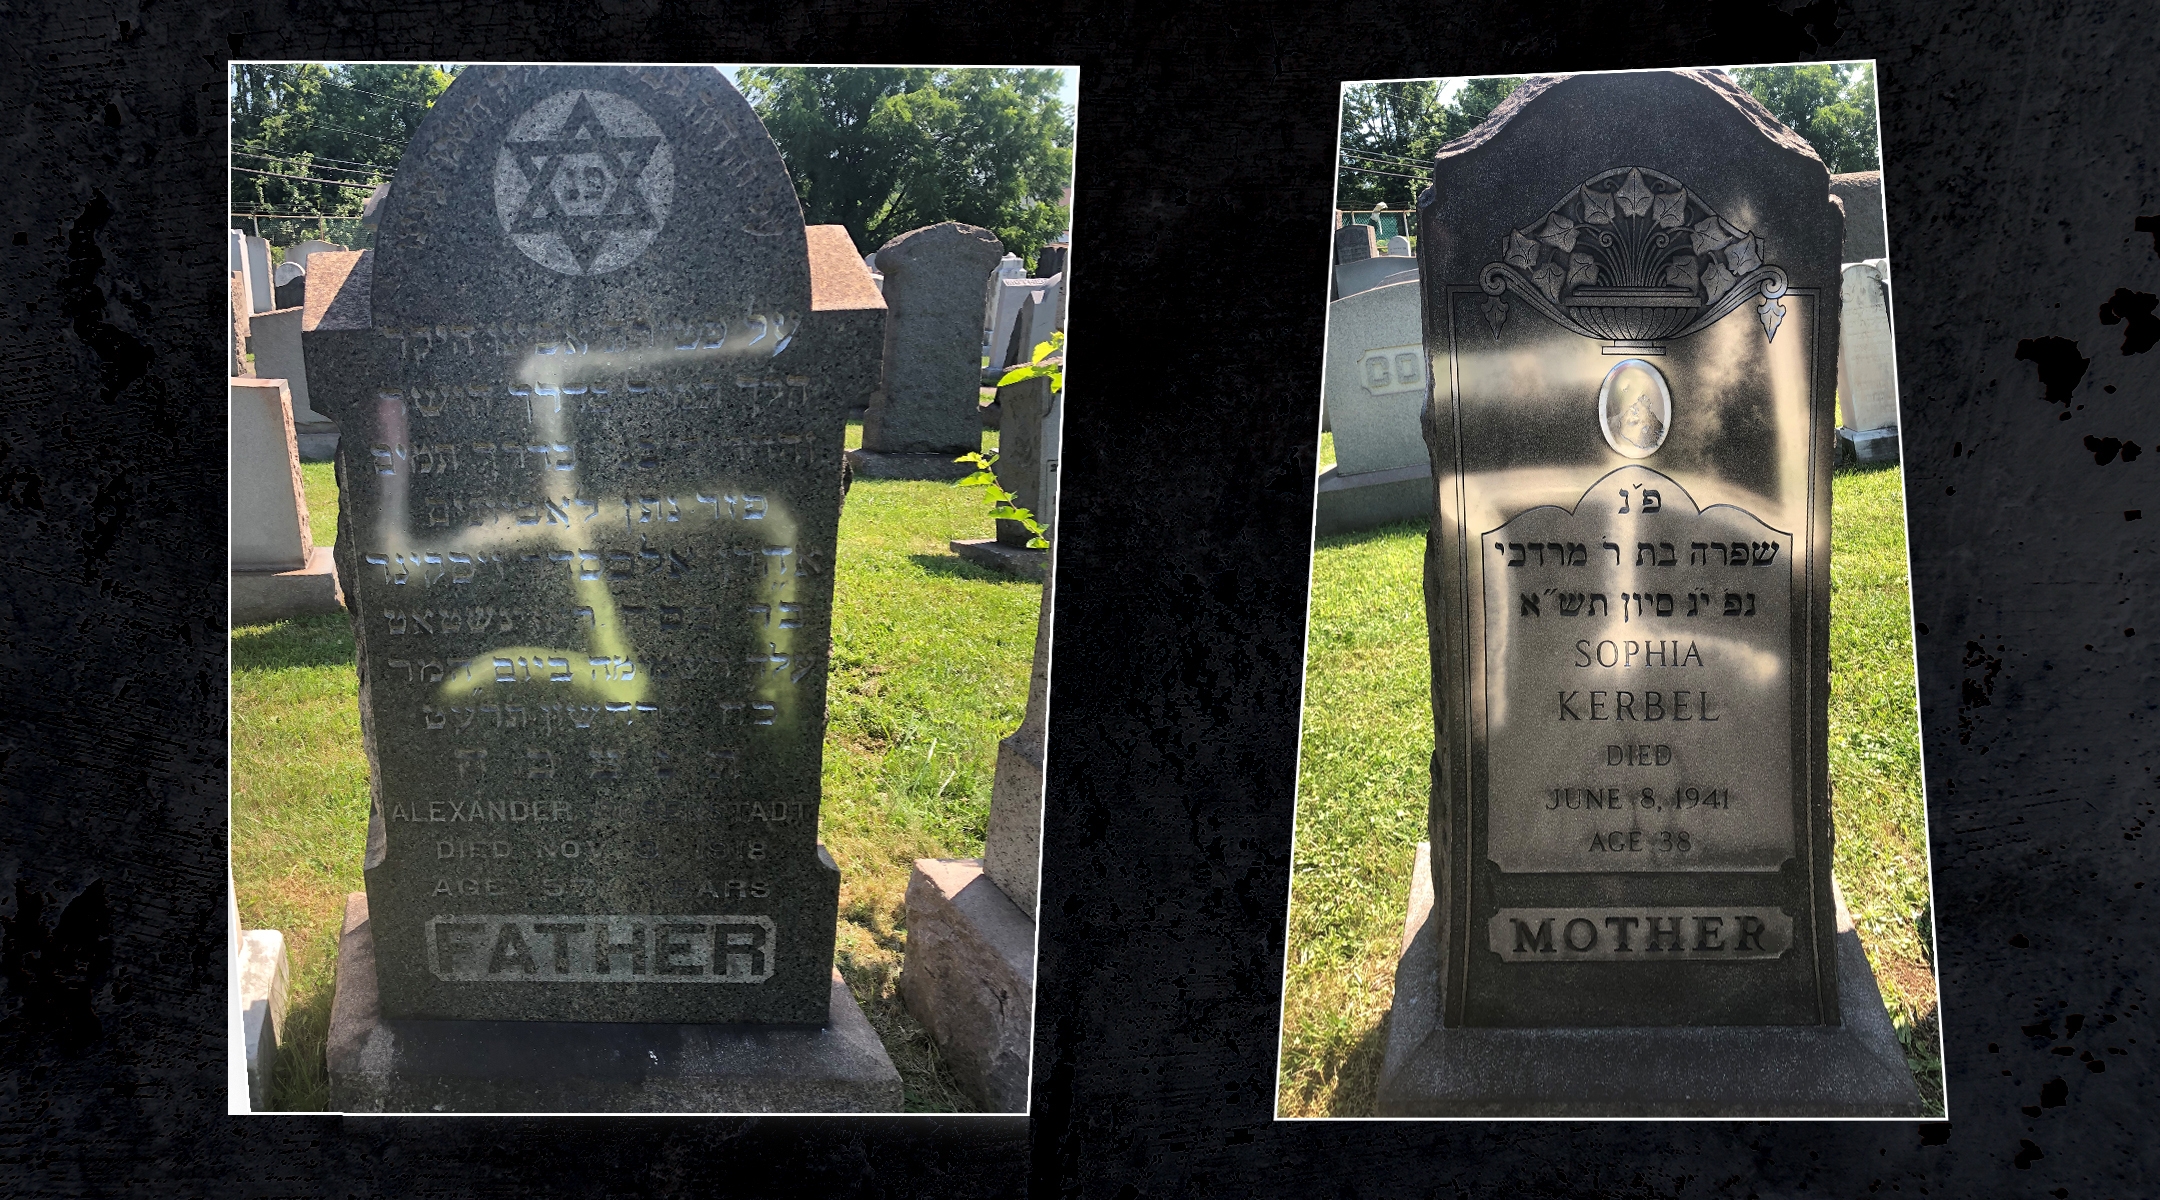 Defaced gravestones at a Jewish cemetery in Maryland